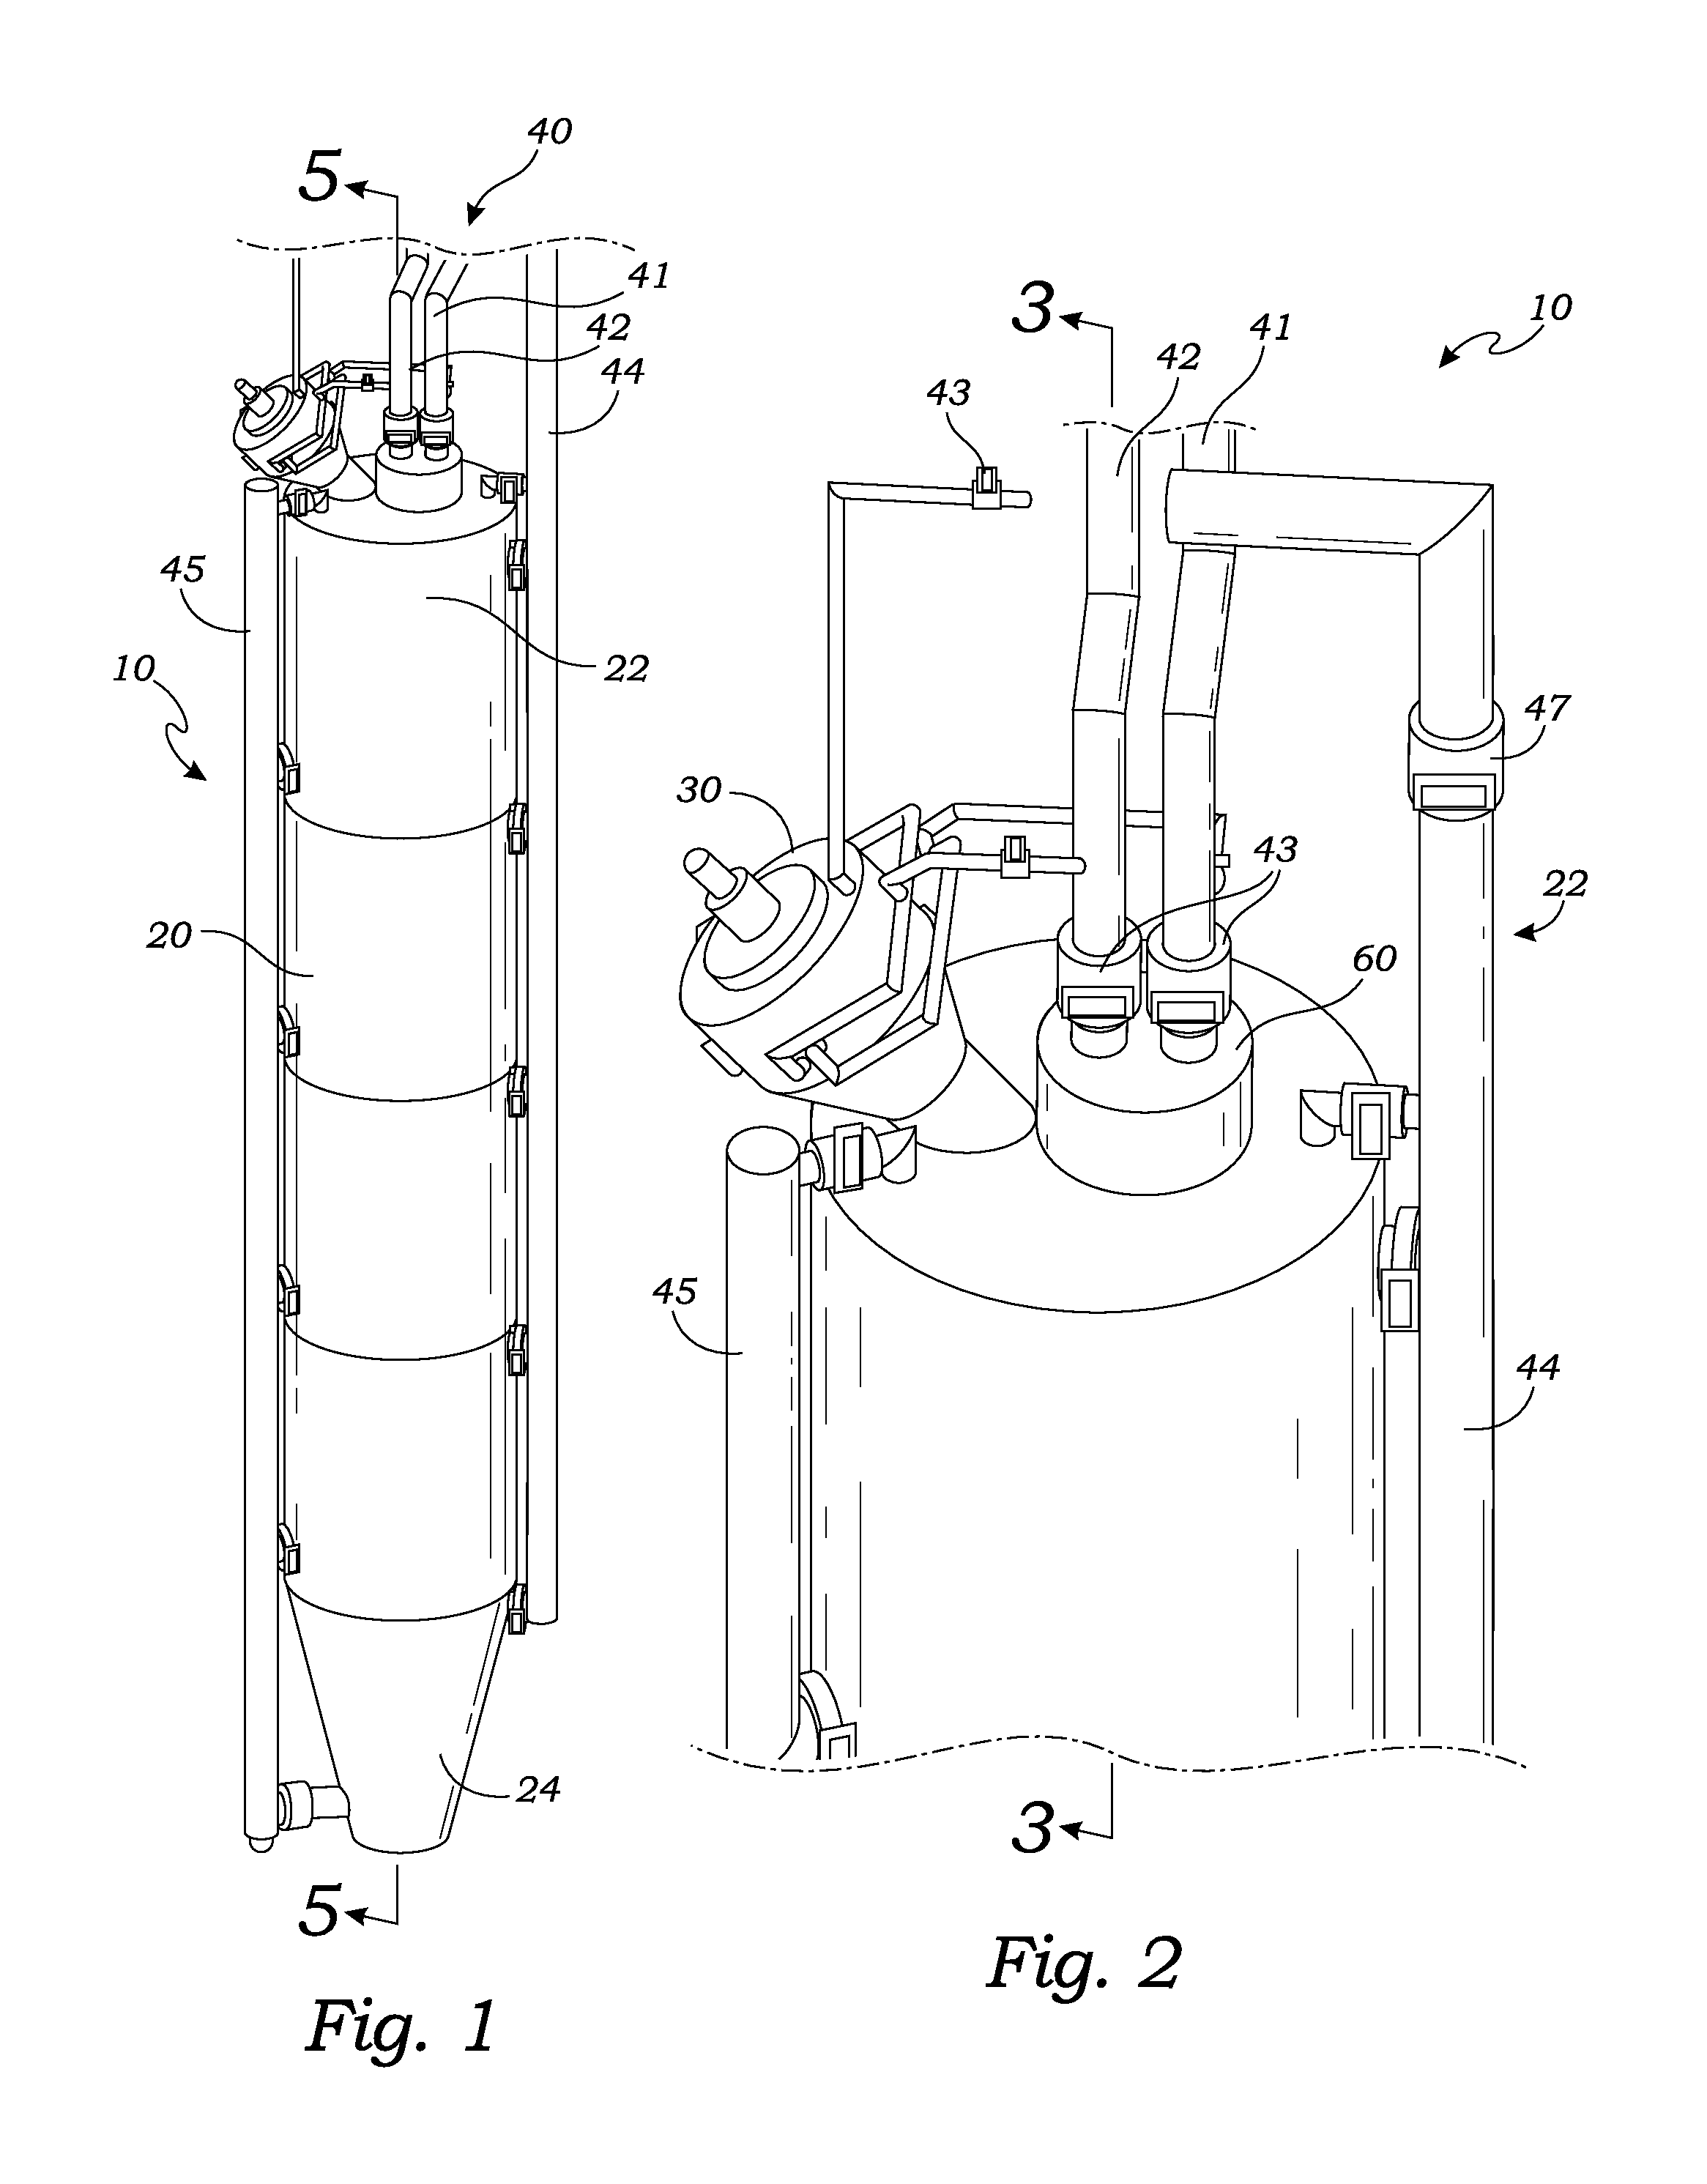 Method of operation of a downhole gas generator with multiple combustion chambers